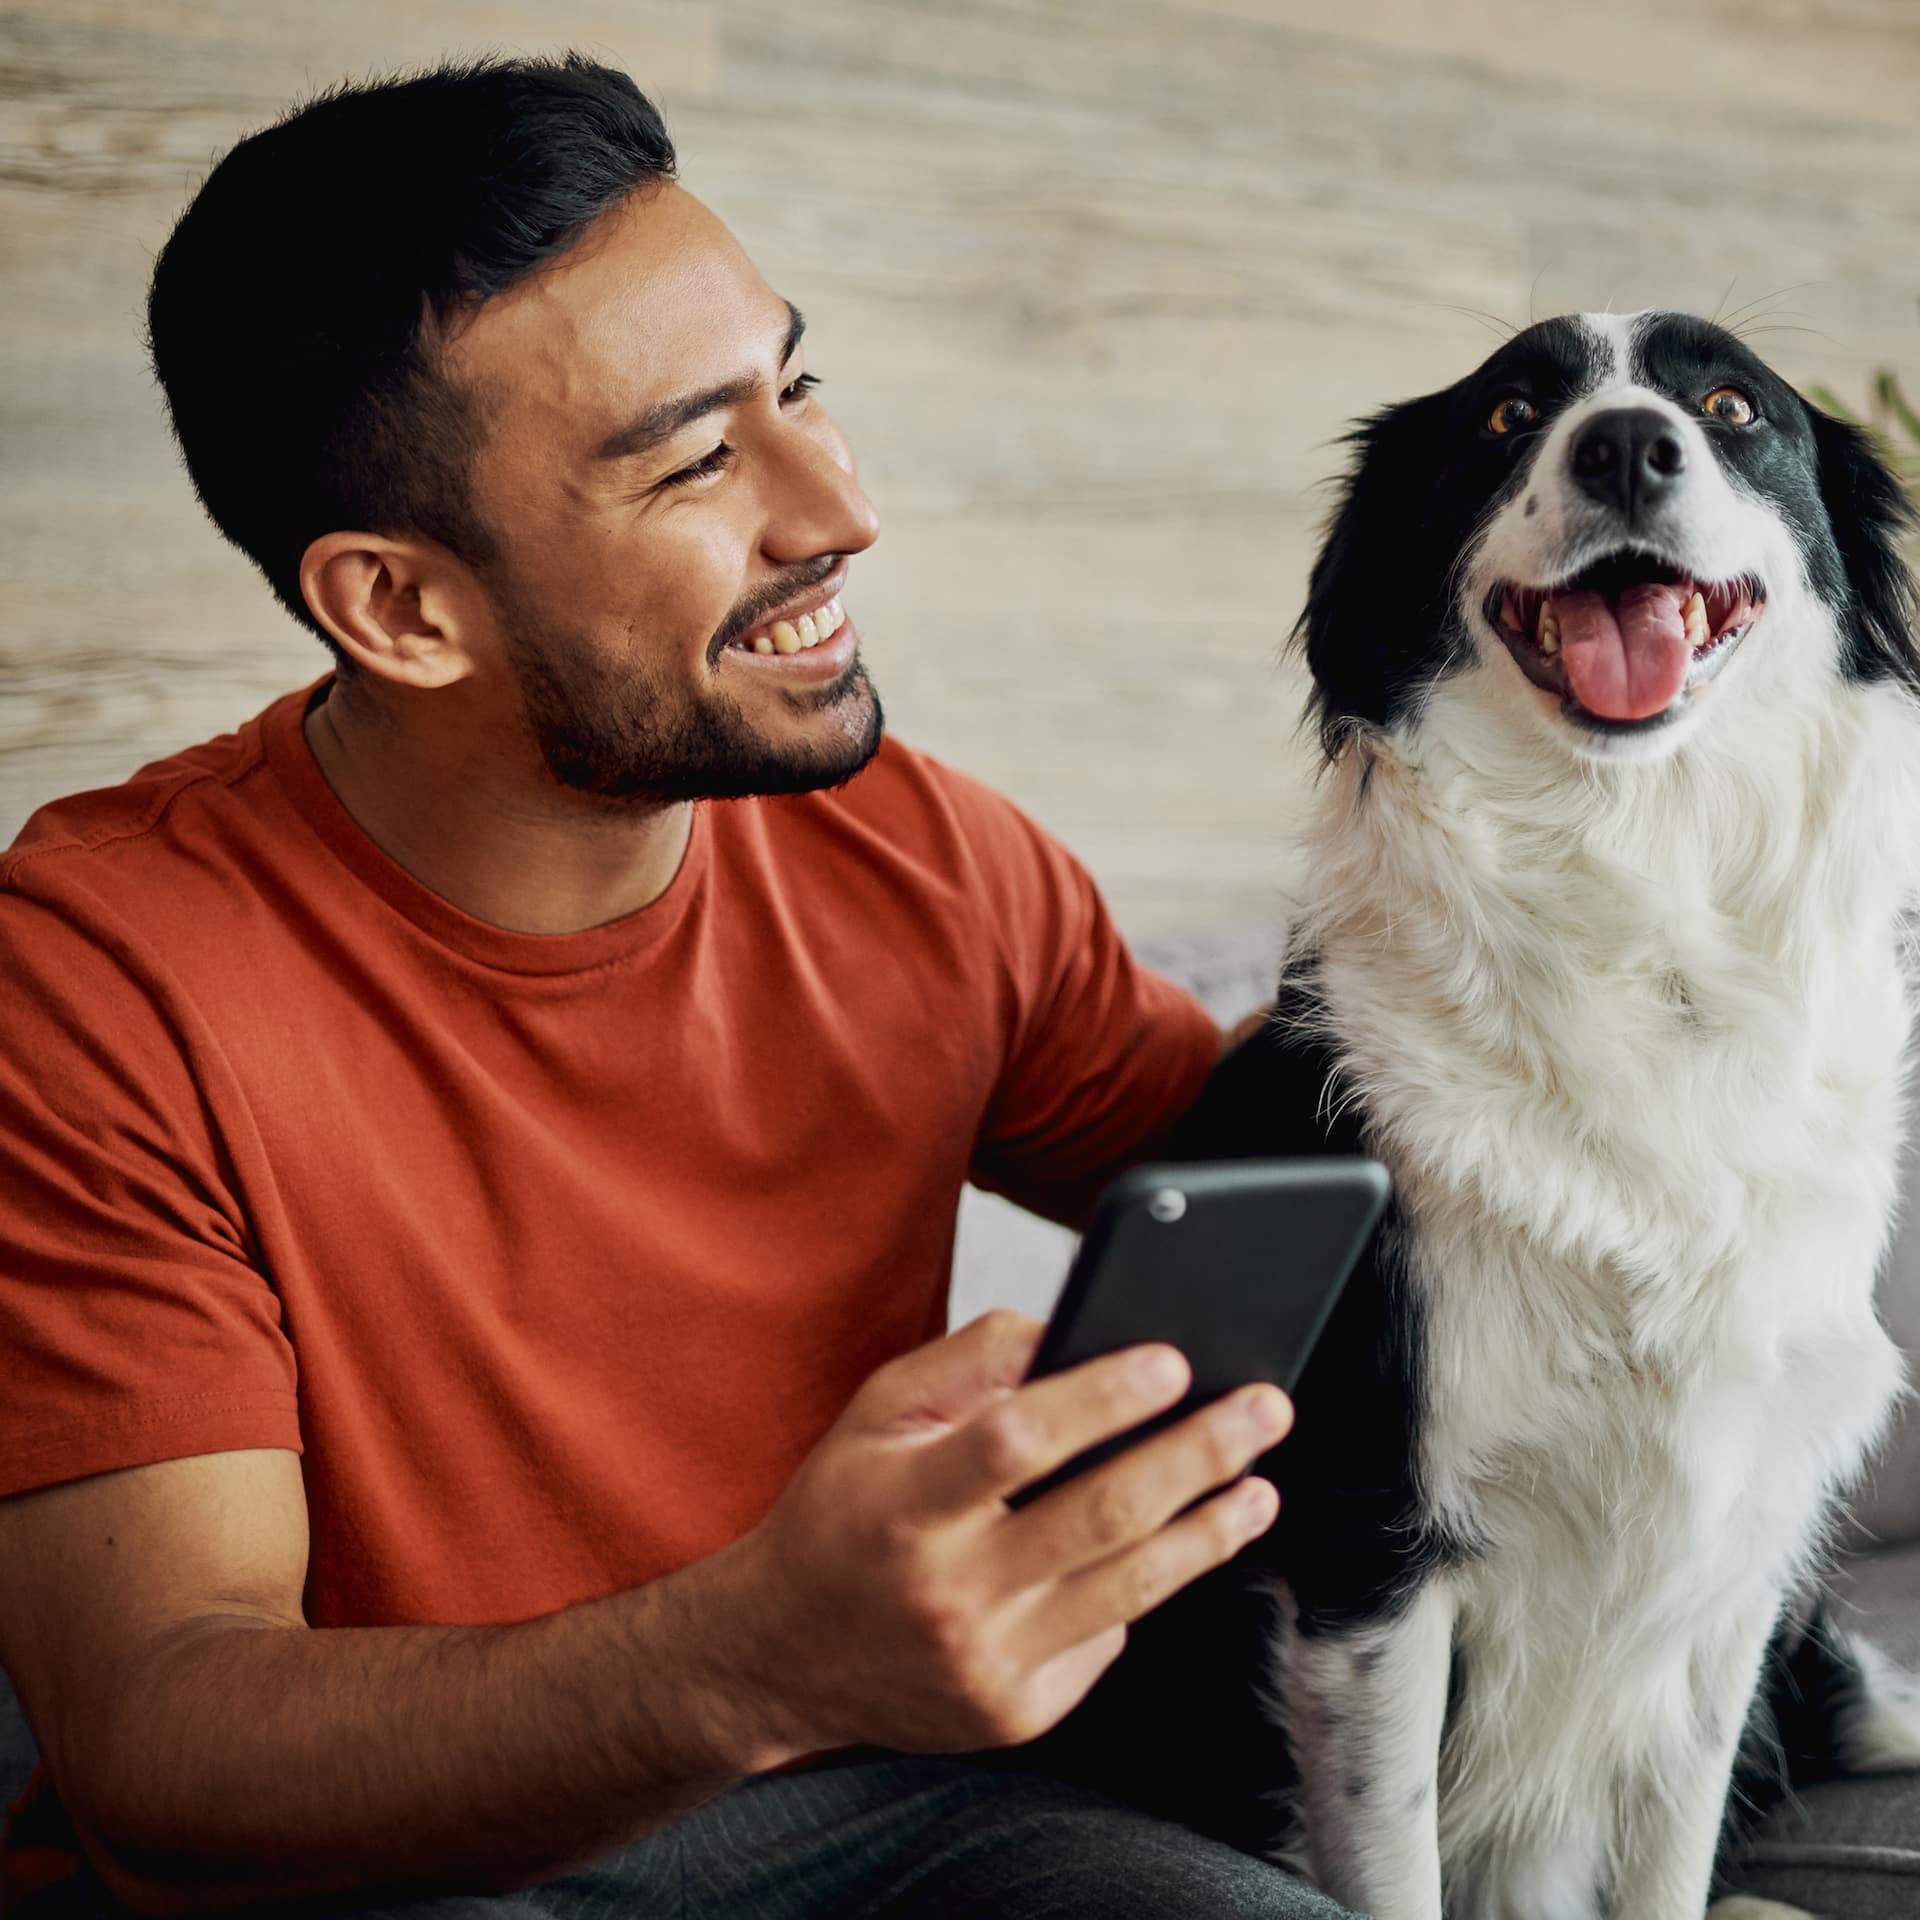 Man in orange t-shirt with phone and black and white dog